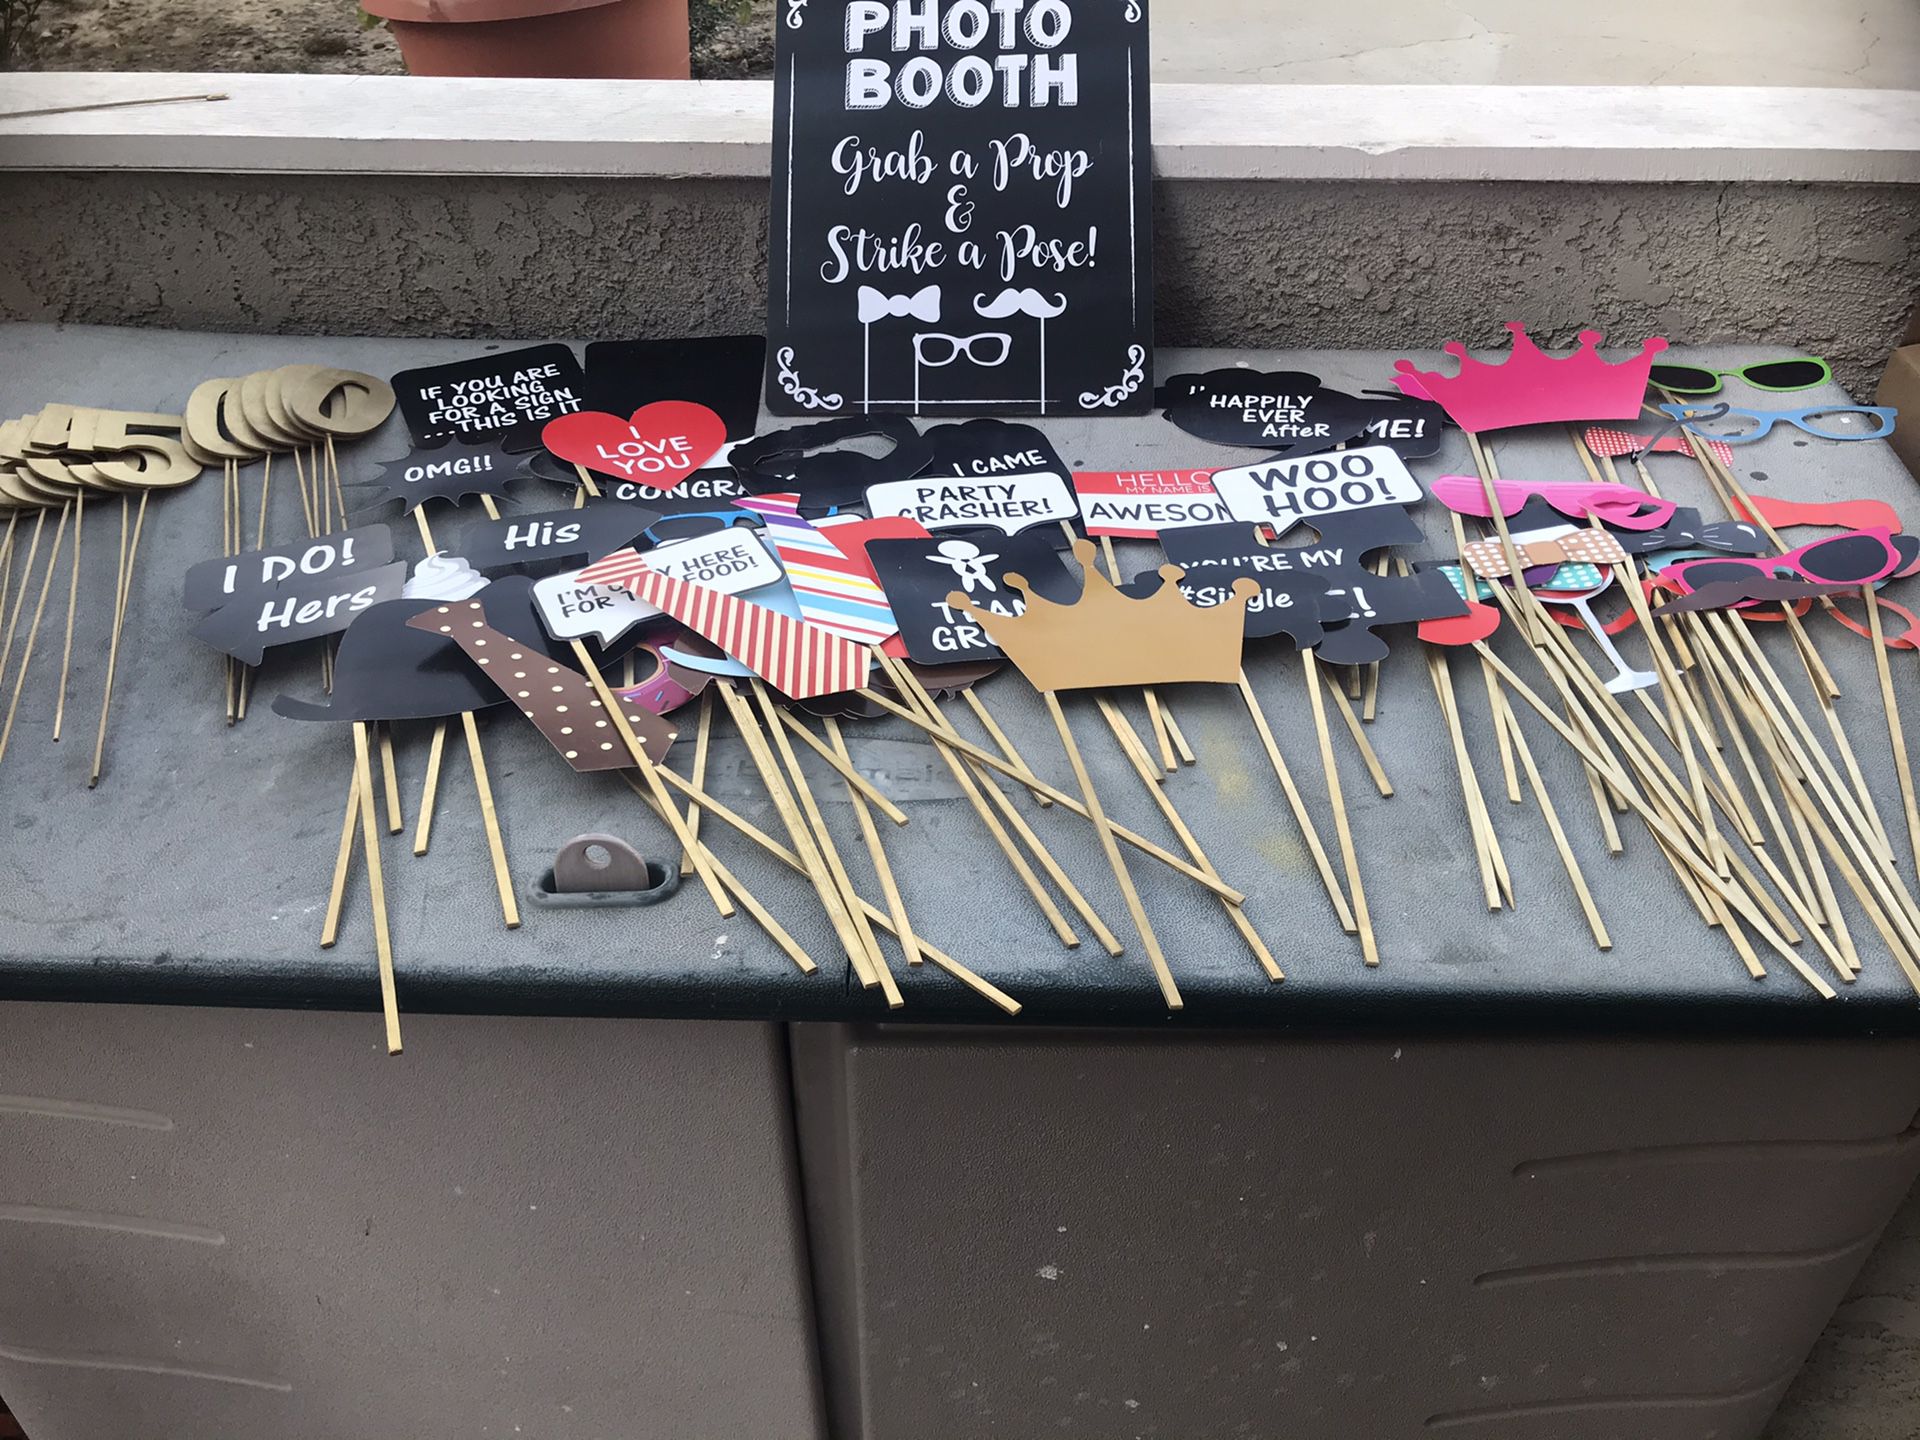 Wedding props for photo booth